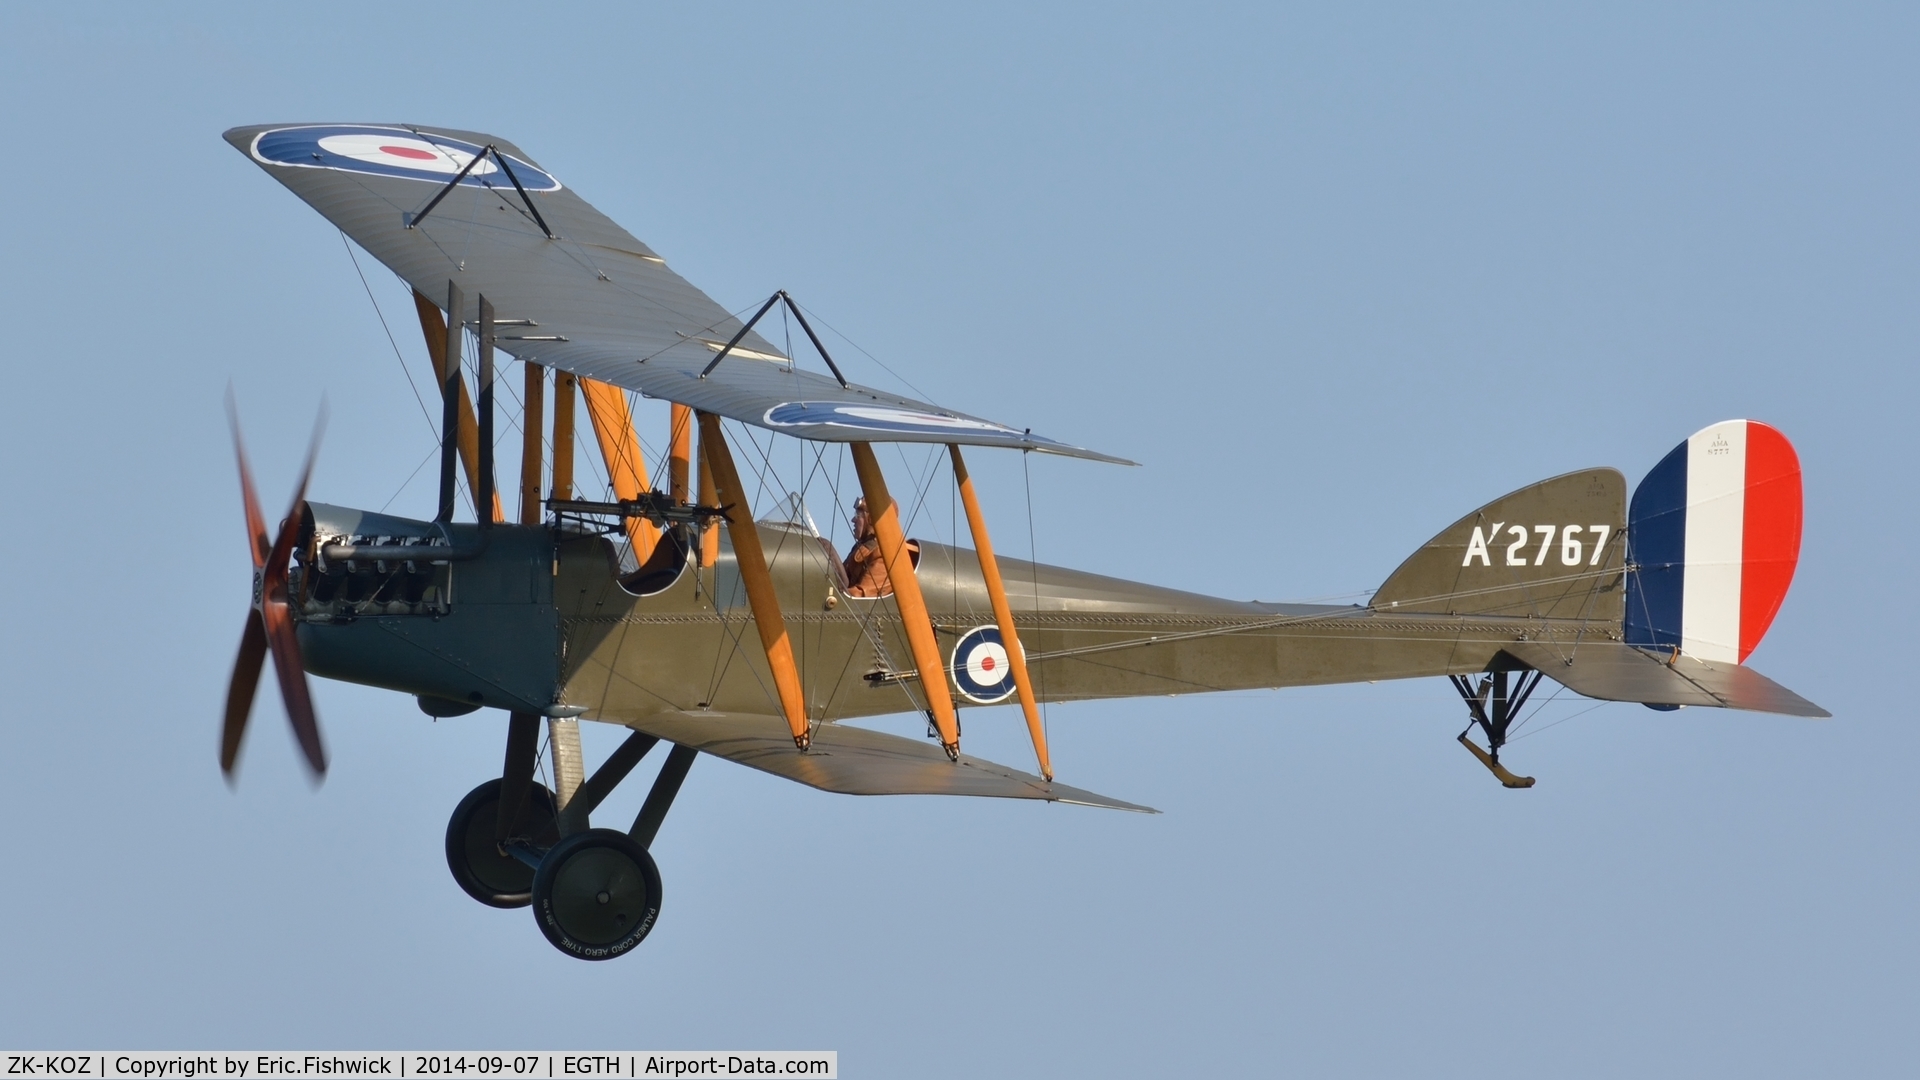 ZK-KOZ, 2014 Royal Aircraft Factory BE-2e Replica C/N 752, 43. A'2767 in display mode at the glorious Shuttleworth Pagent Airshow, Sep. 2014.